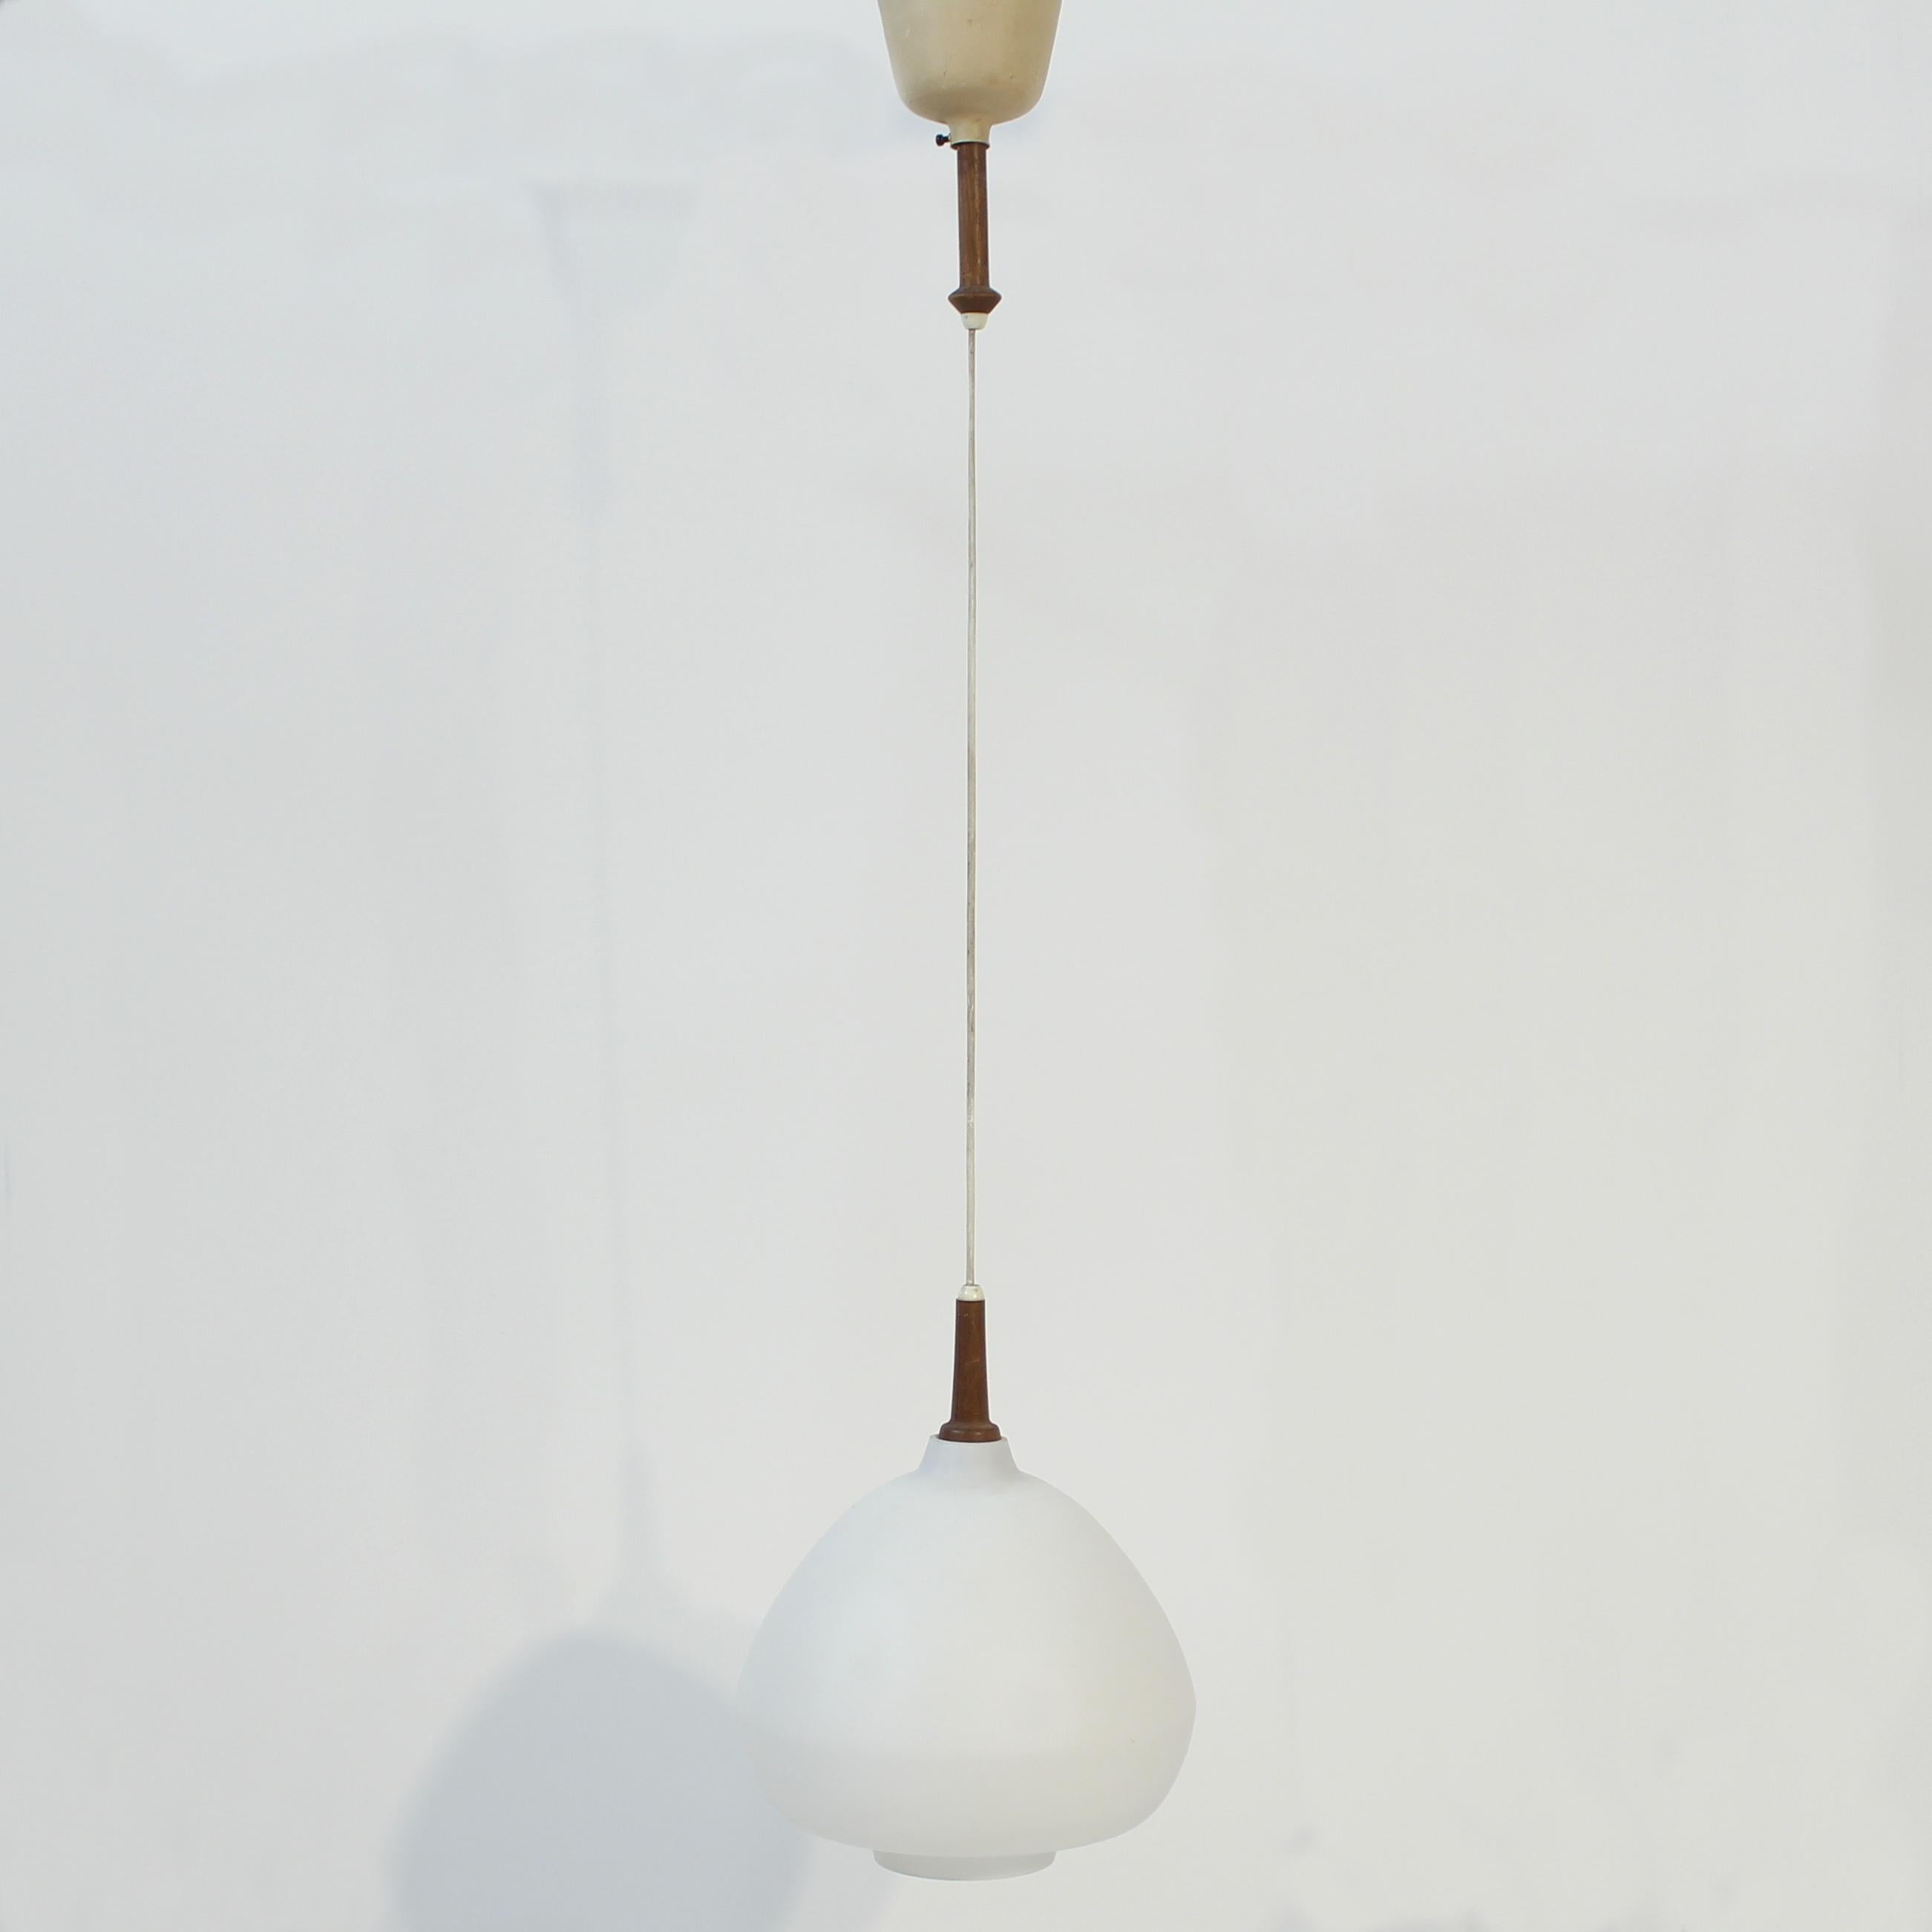 Ceiling lamp in teak and opaline glass designed by Hans-Agne Jakobsson for his own company in the early part of his career in the 1950s. It consists of an opaline glass, dome shaped, shade with a few teak details and a metal ceiling cup. Marked with